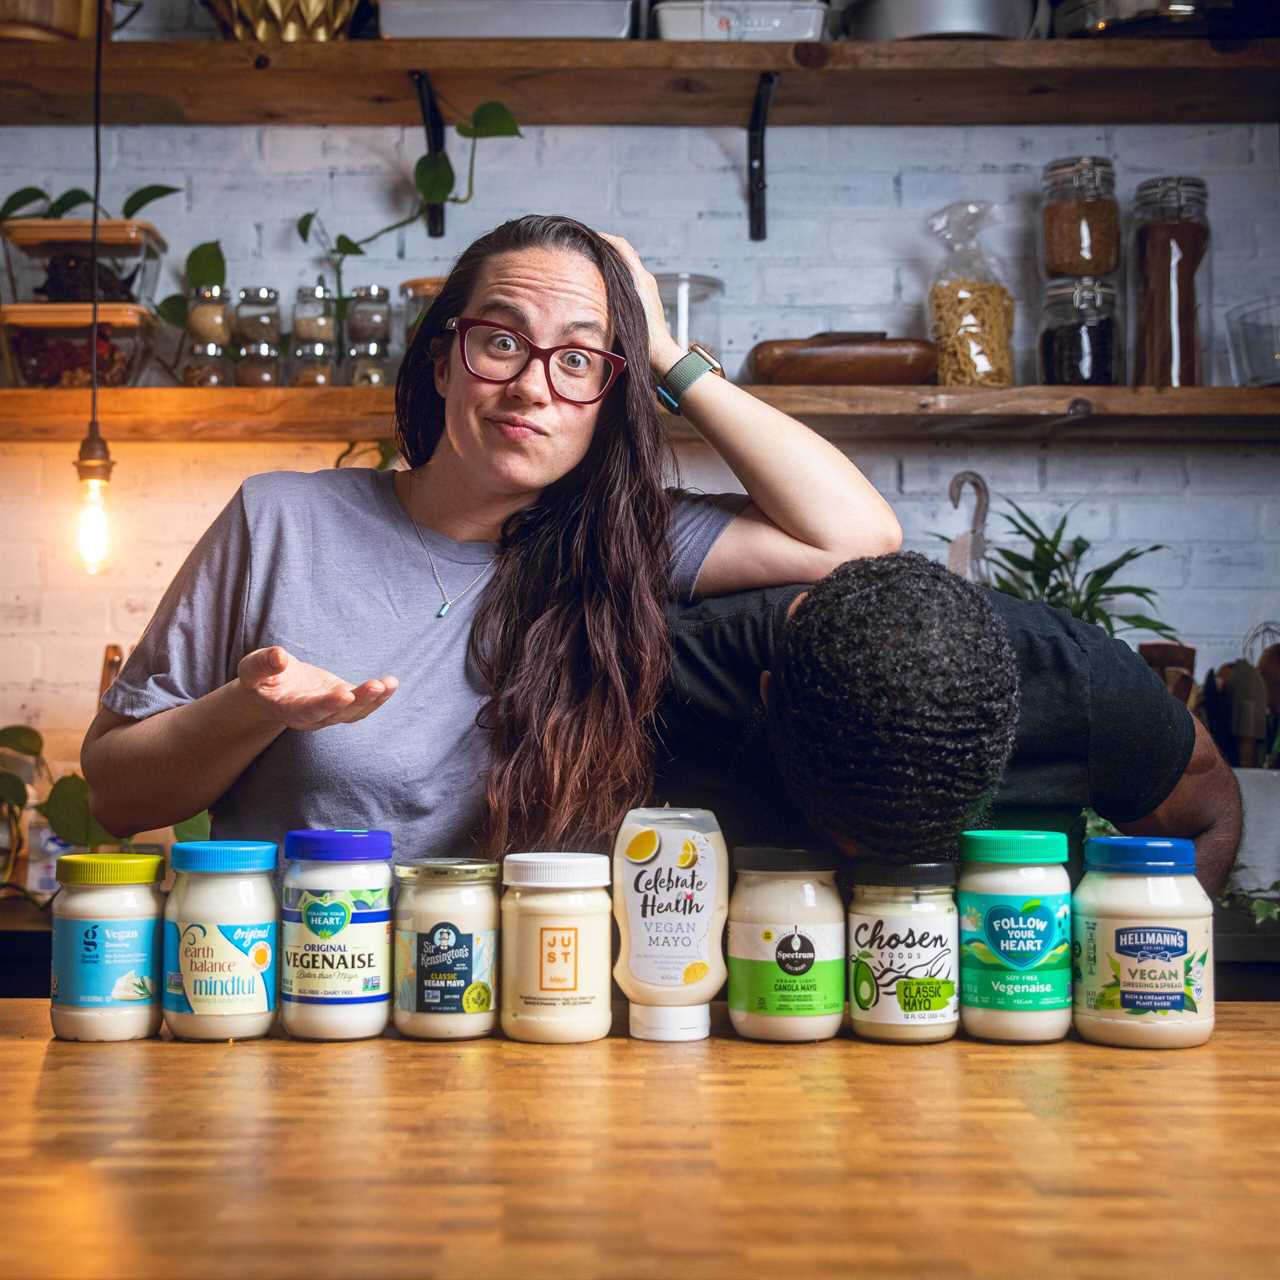 A couple posing funnily in front of an assortment of vegan mayo bottles.